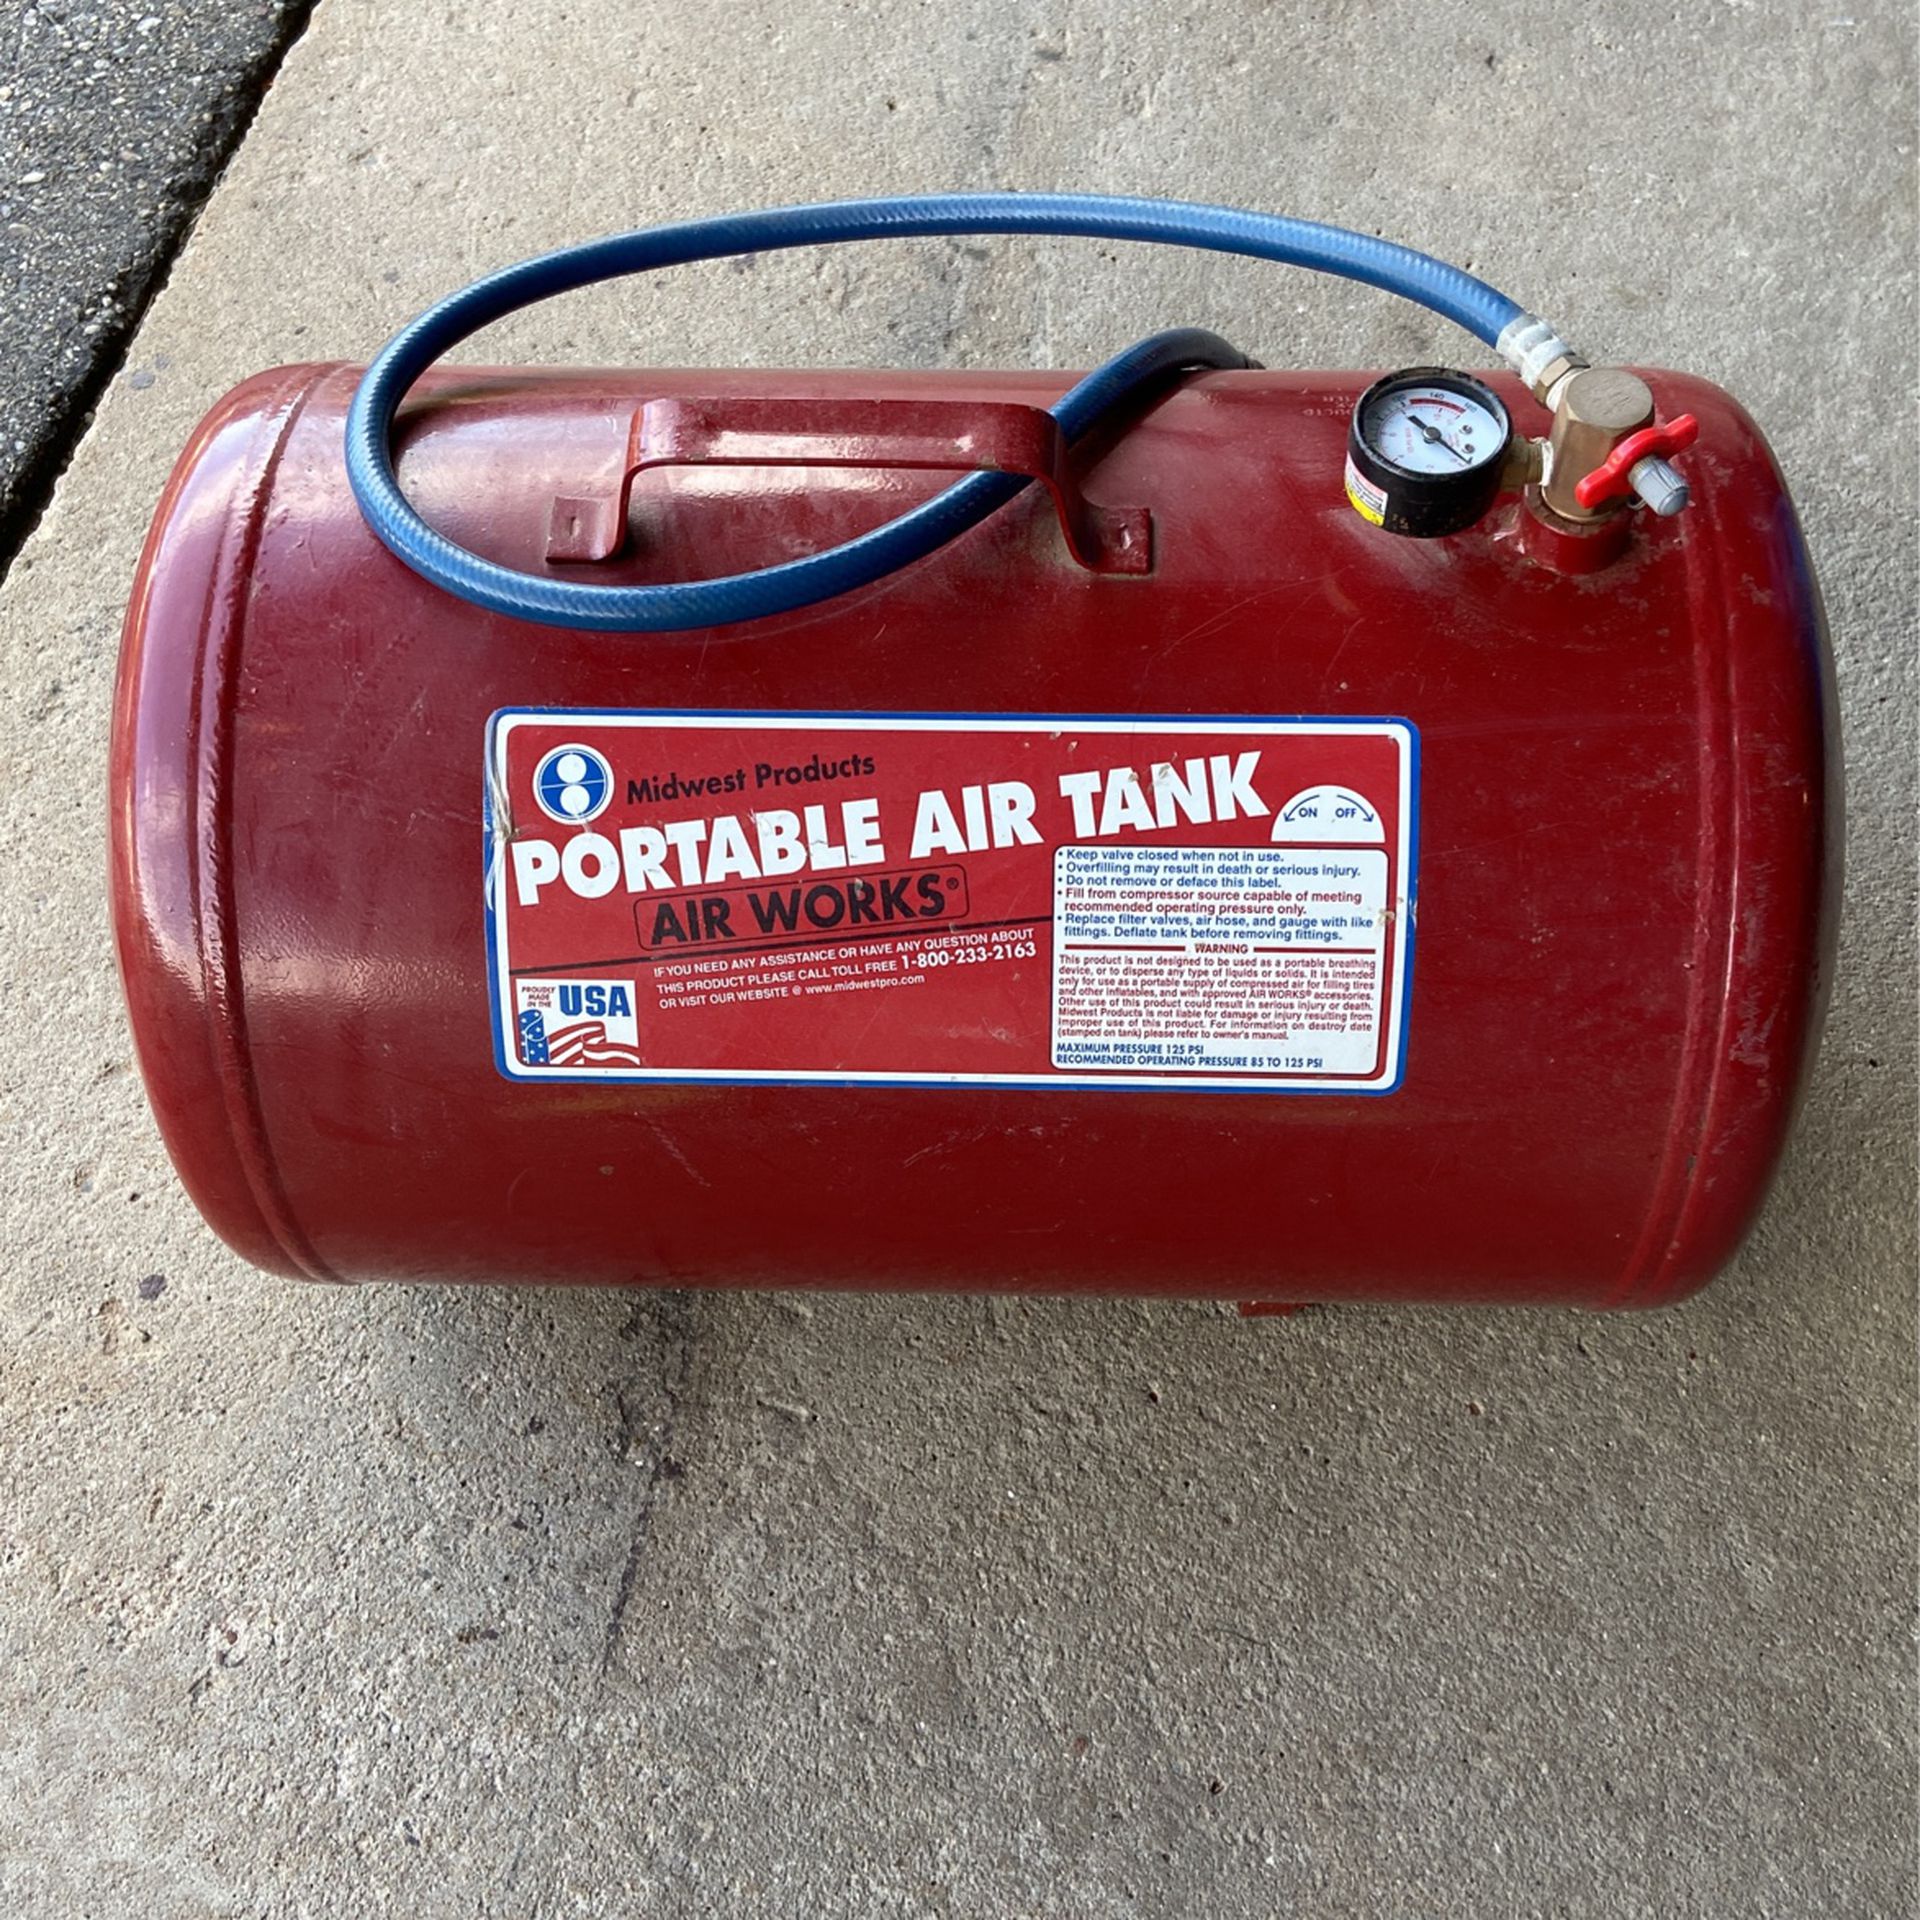 Portable Air Tank Midwest Products